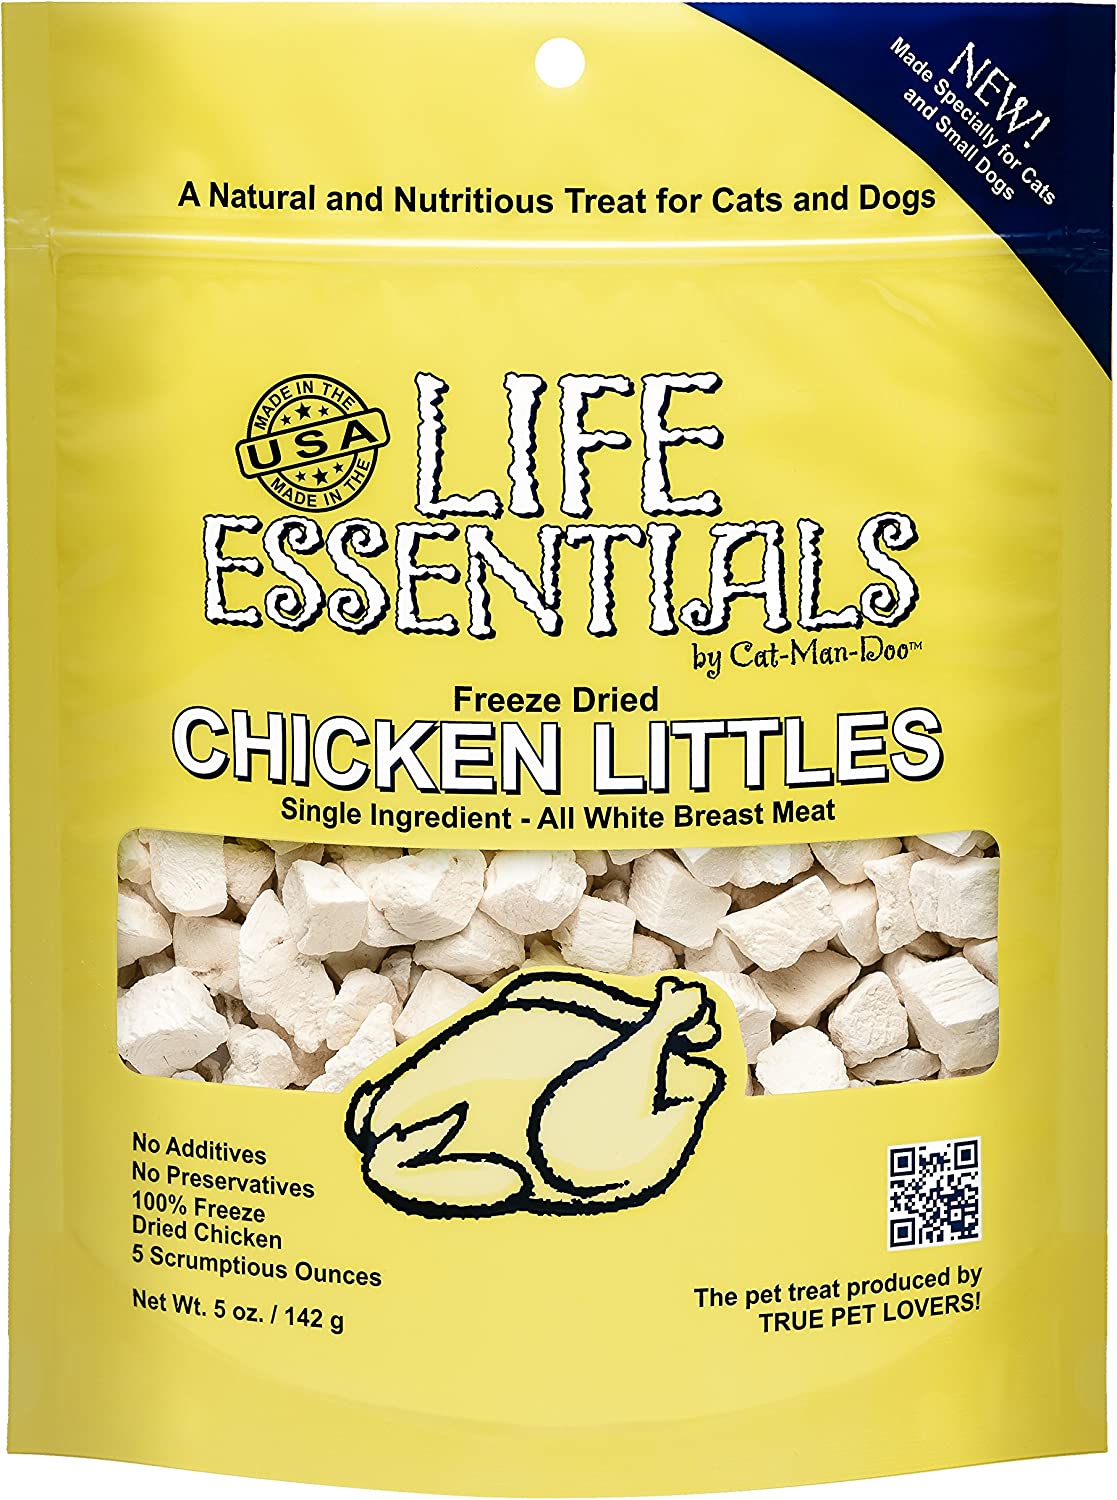 LIFE ESSENTIALS BY CAT-MAN-DOO Freeze Dried Chicken Little's for Dogs & Cats -5 oz